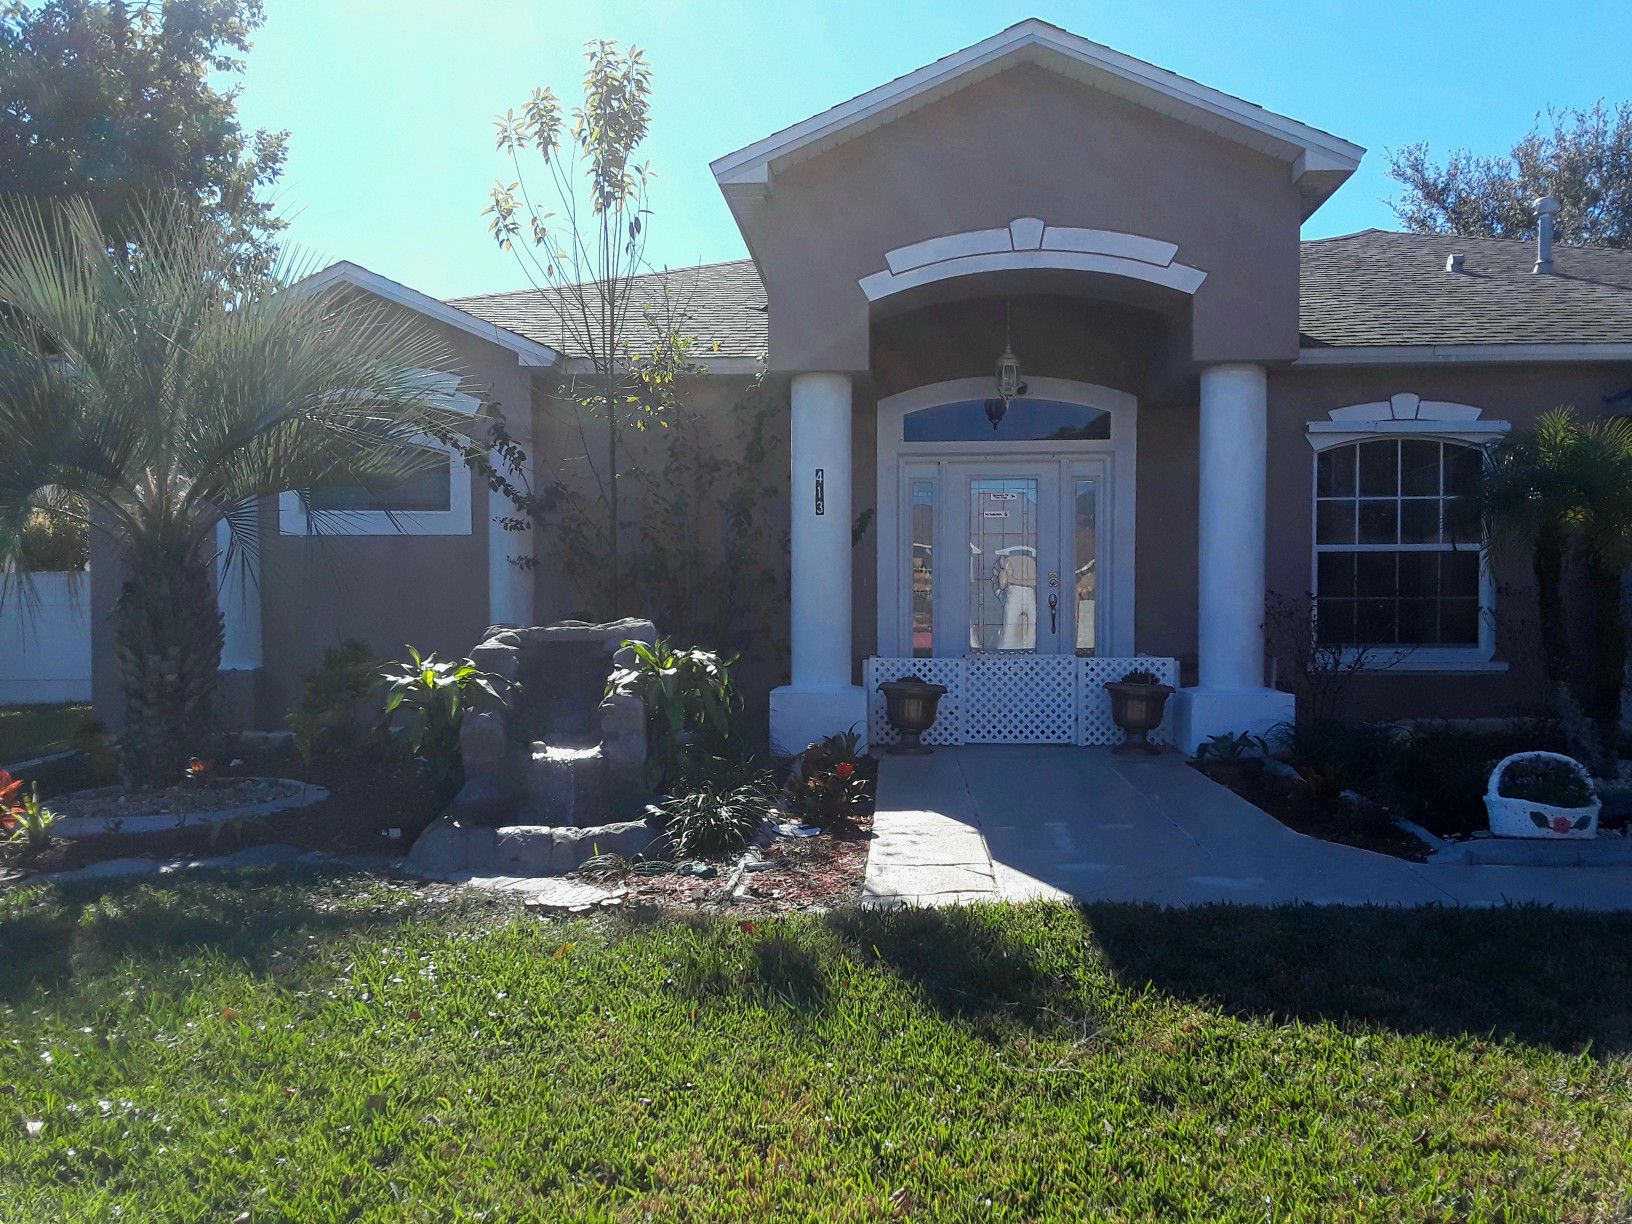 BEAUTIFUL Home for sale in Haines city